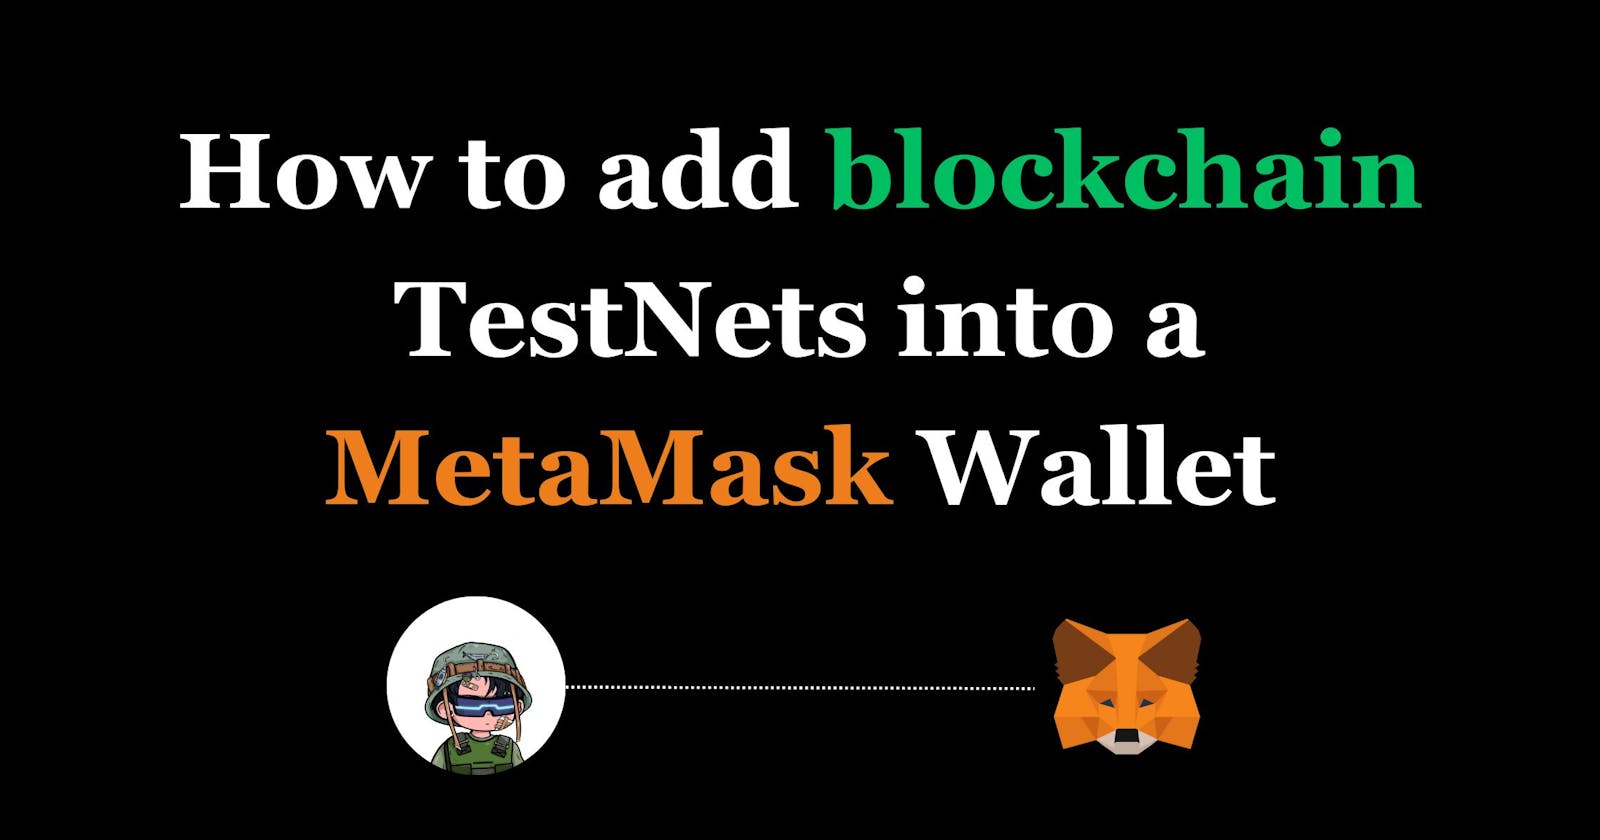 How To Add  Blockchain TestNets Into a MetaMask Wallet.